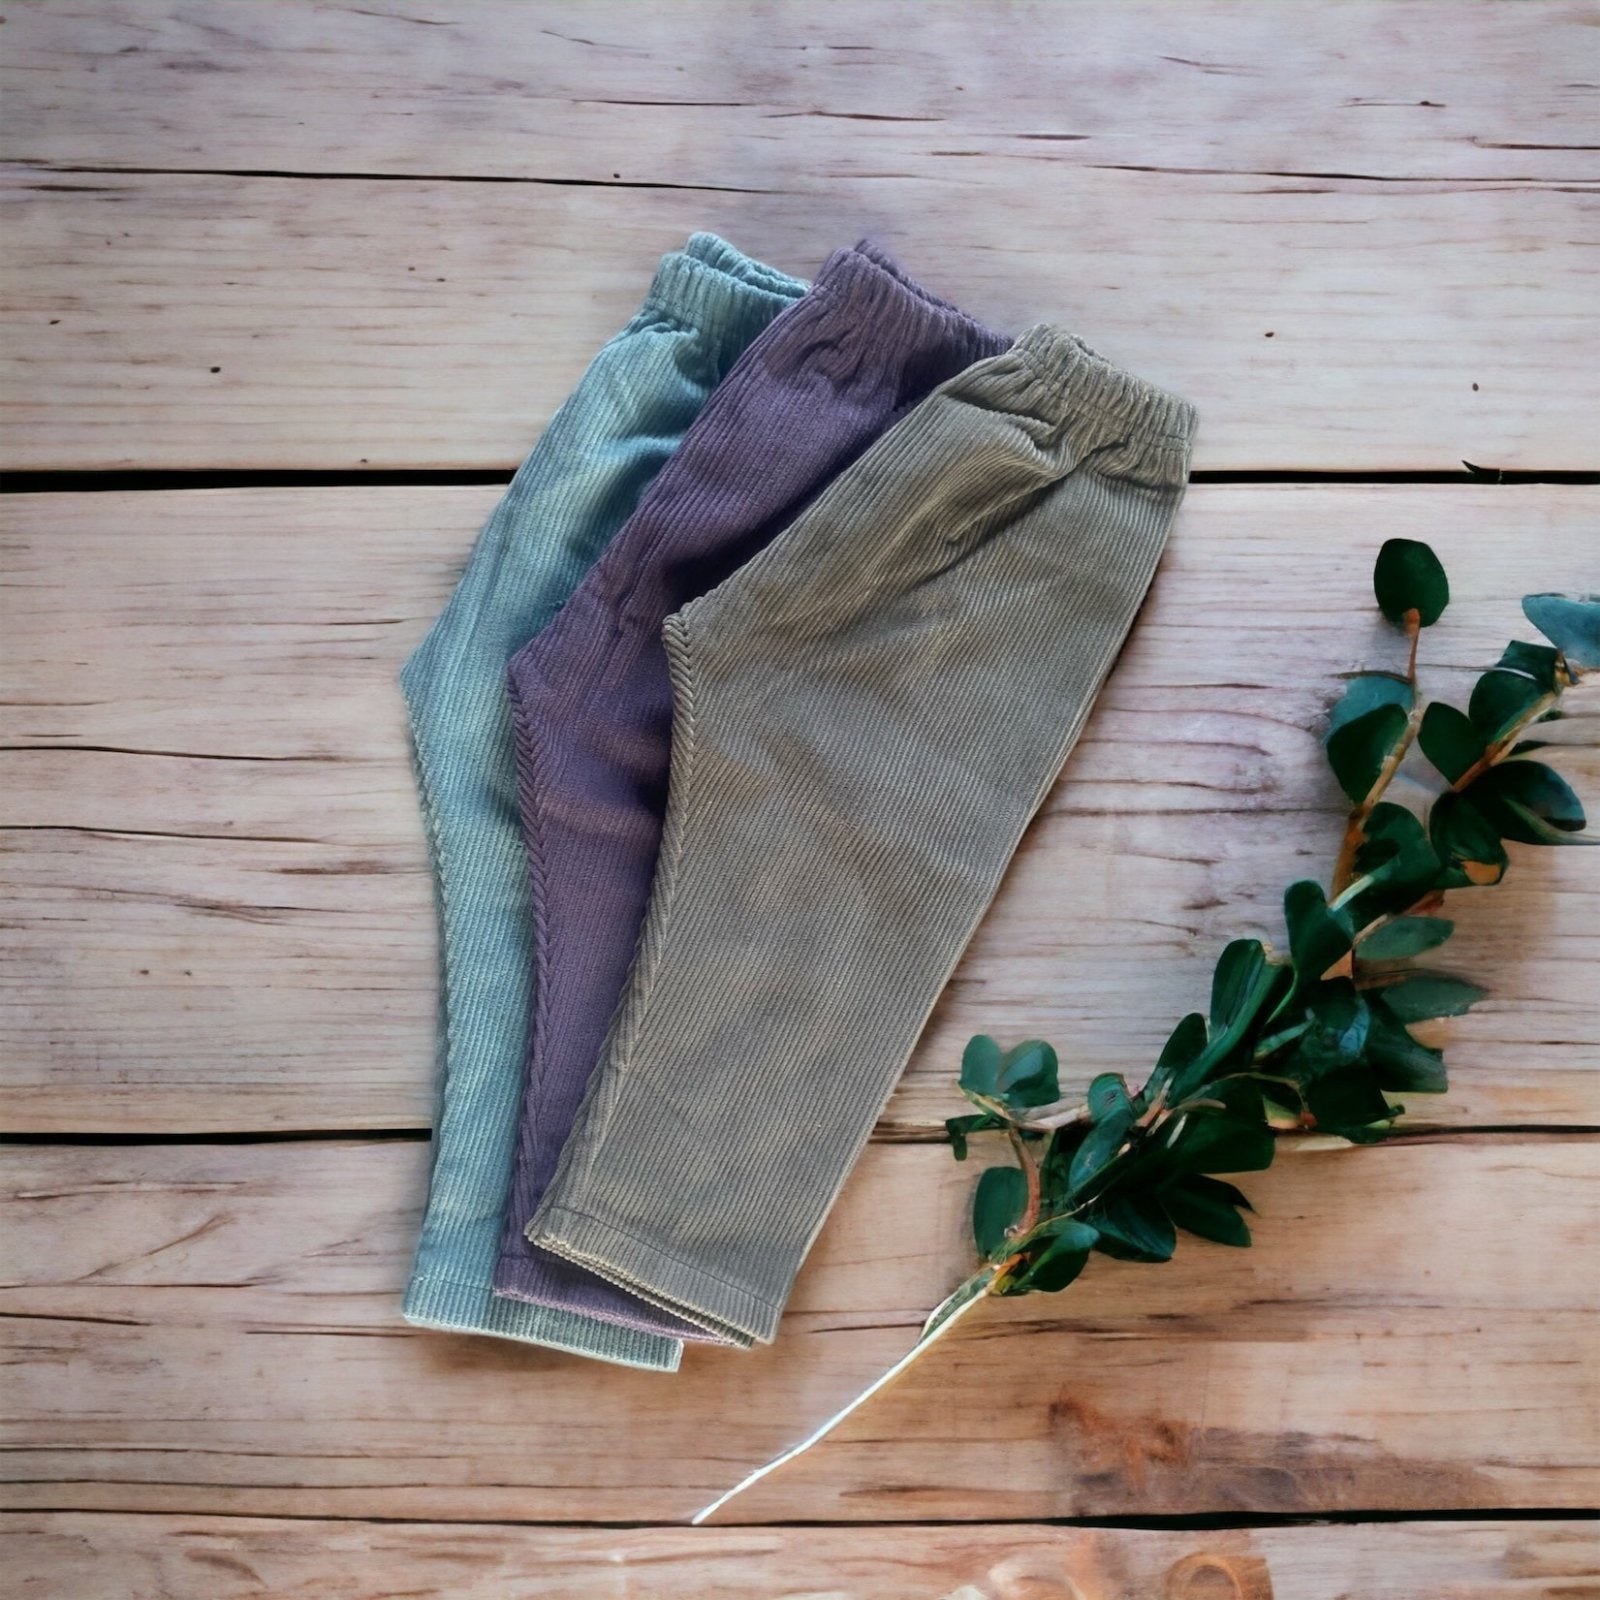 Corduroy Panpan Pants find Stylish Fashion for Little People- at Little Foxx Concept Store